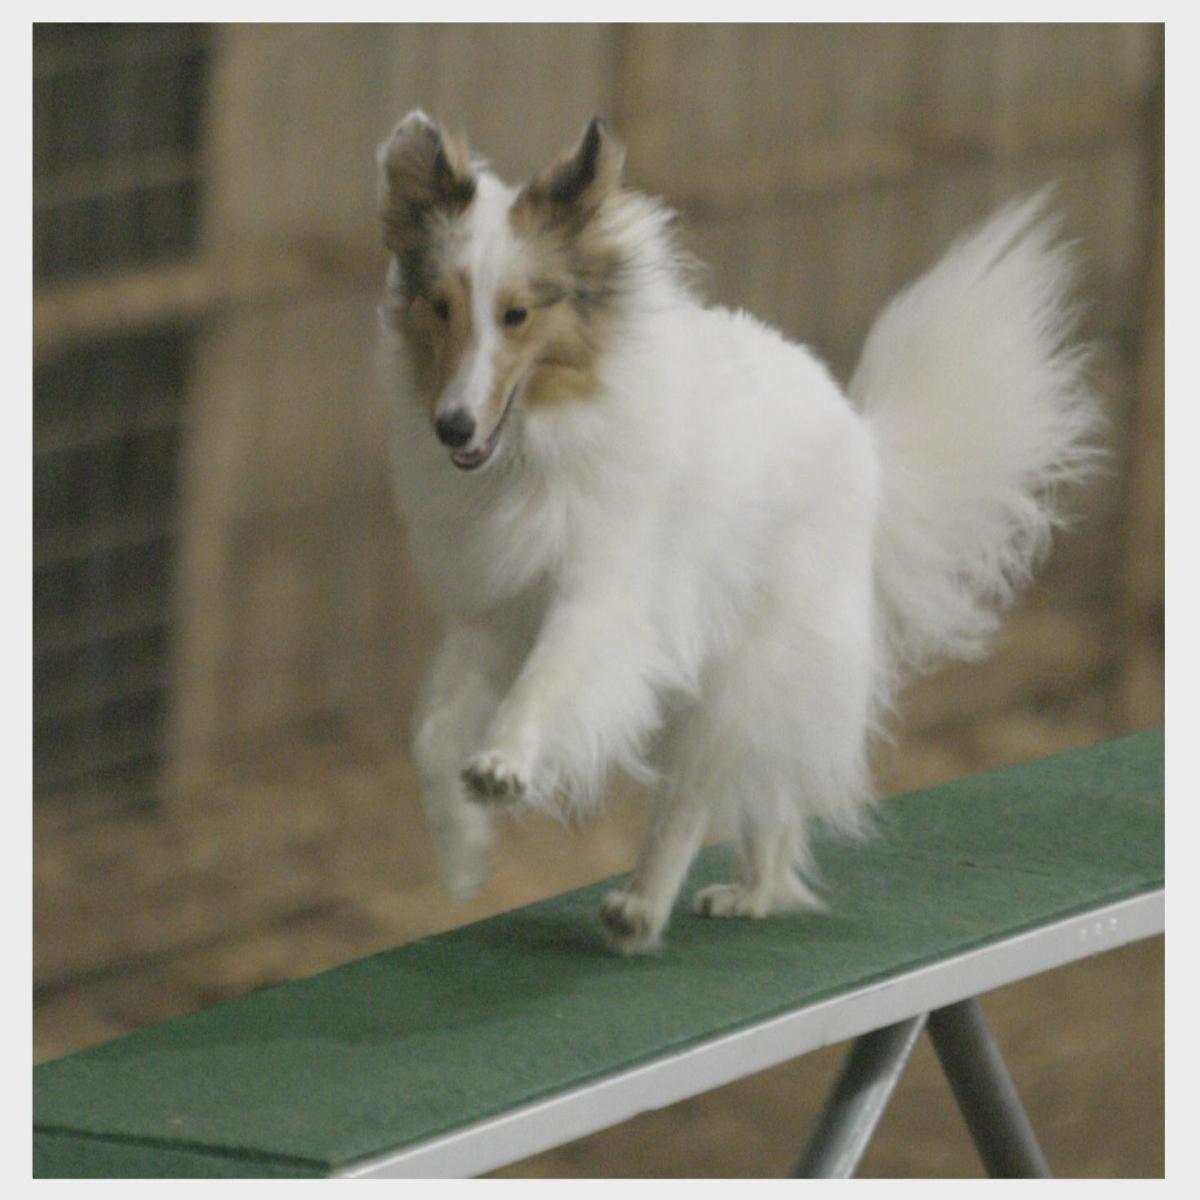 Here, the author's Sheltie is running over the dogwalk at his first agility trial.  Notice the high tail carriage.  This shows he is lacking some confidence on the dogwalk.